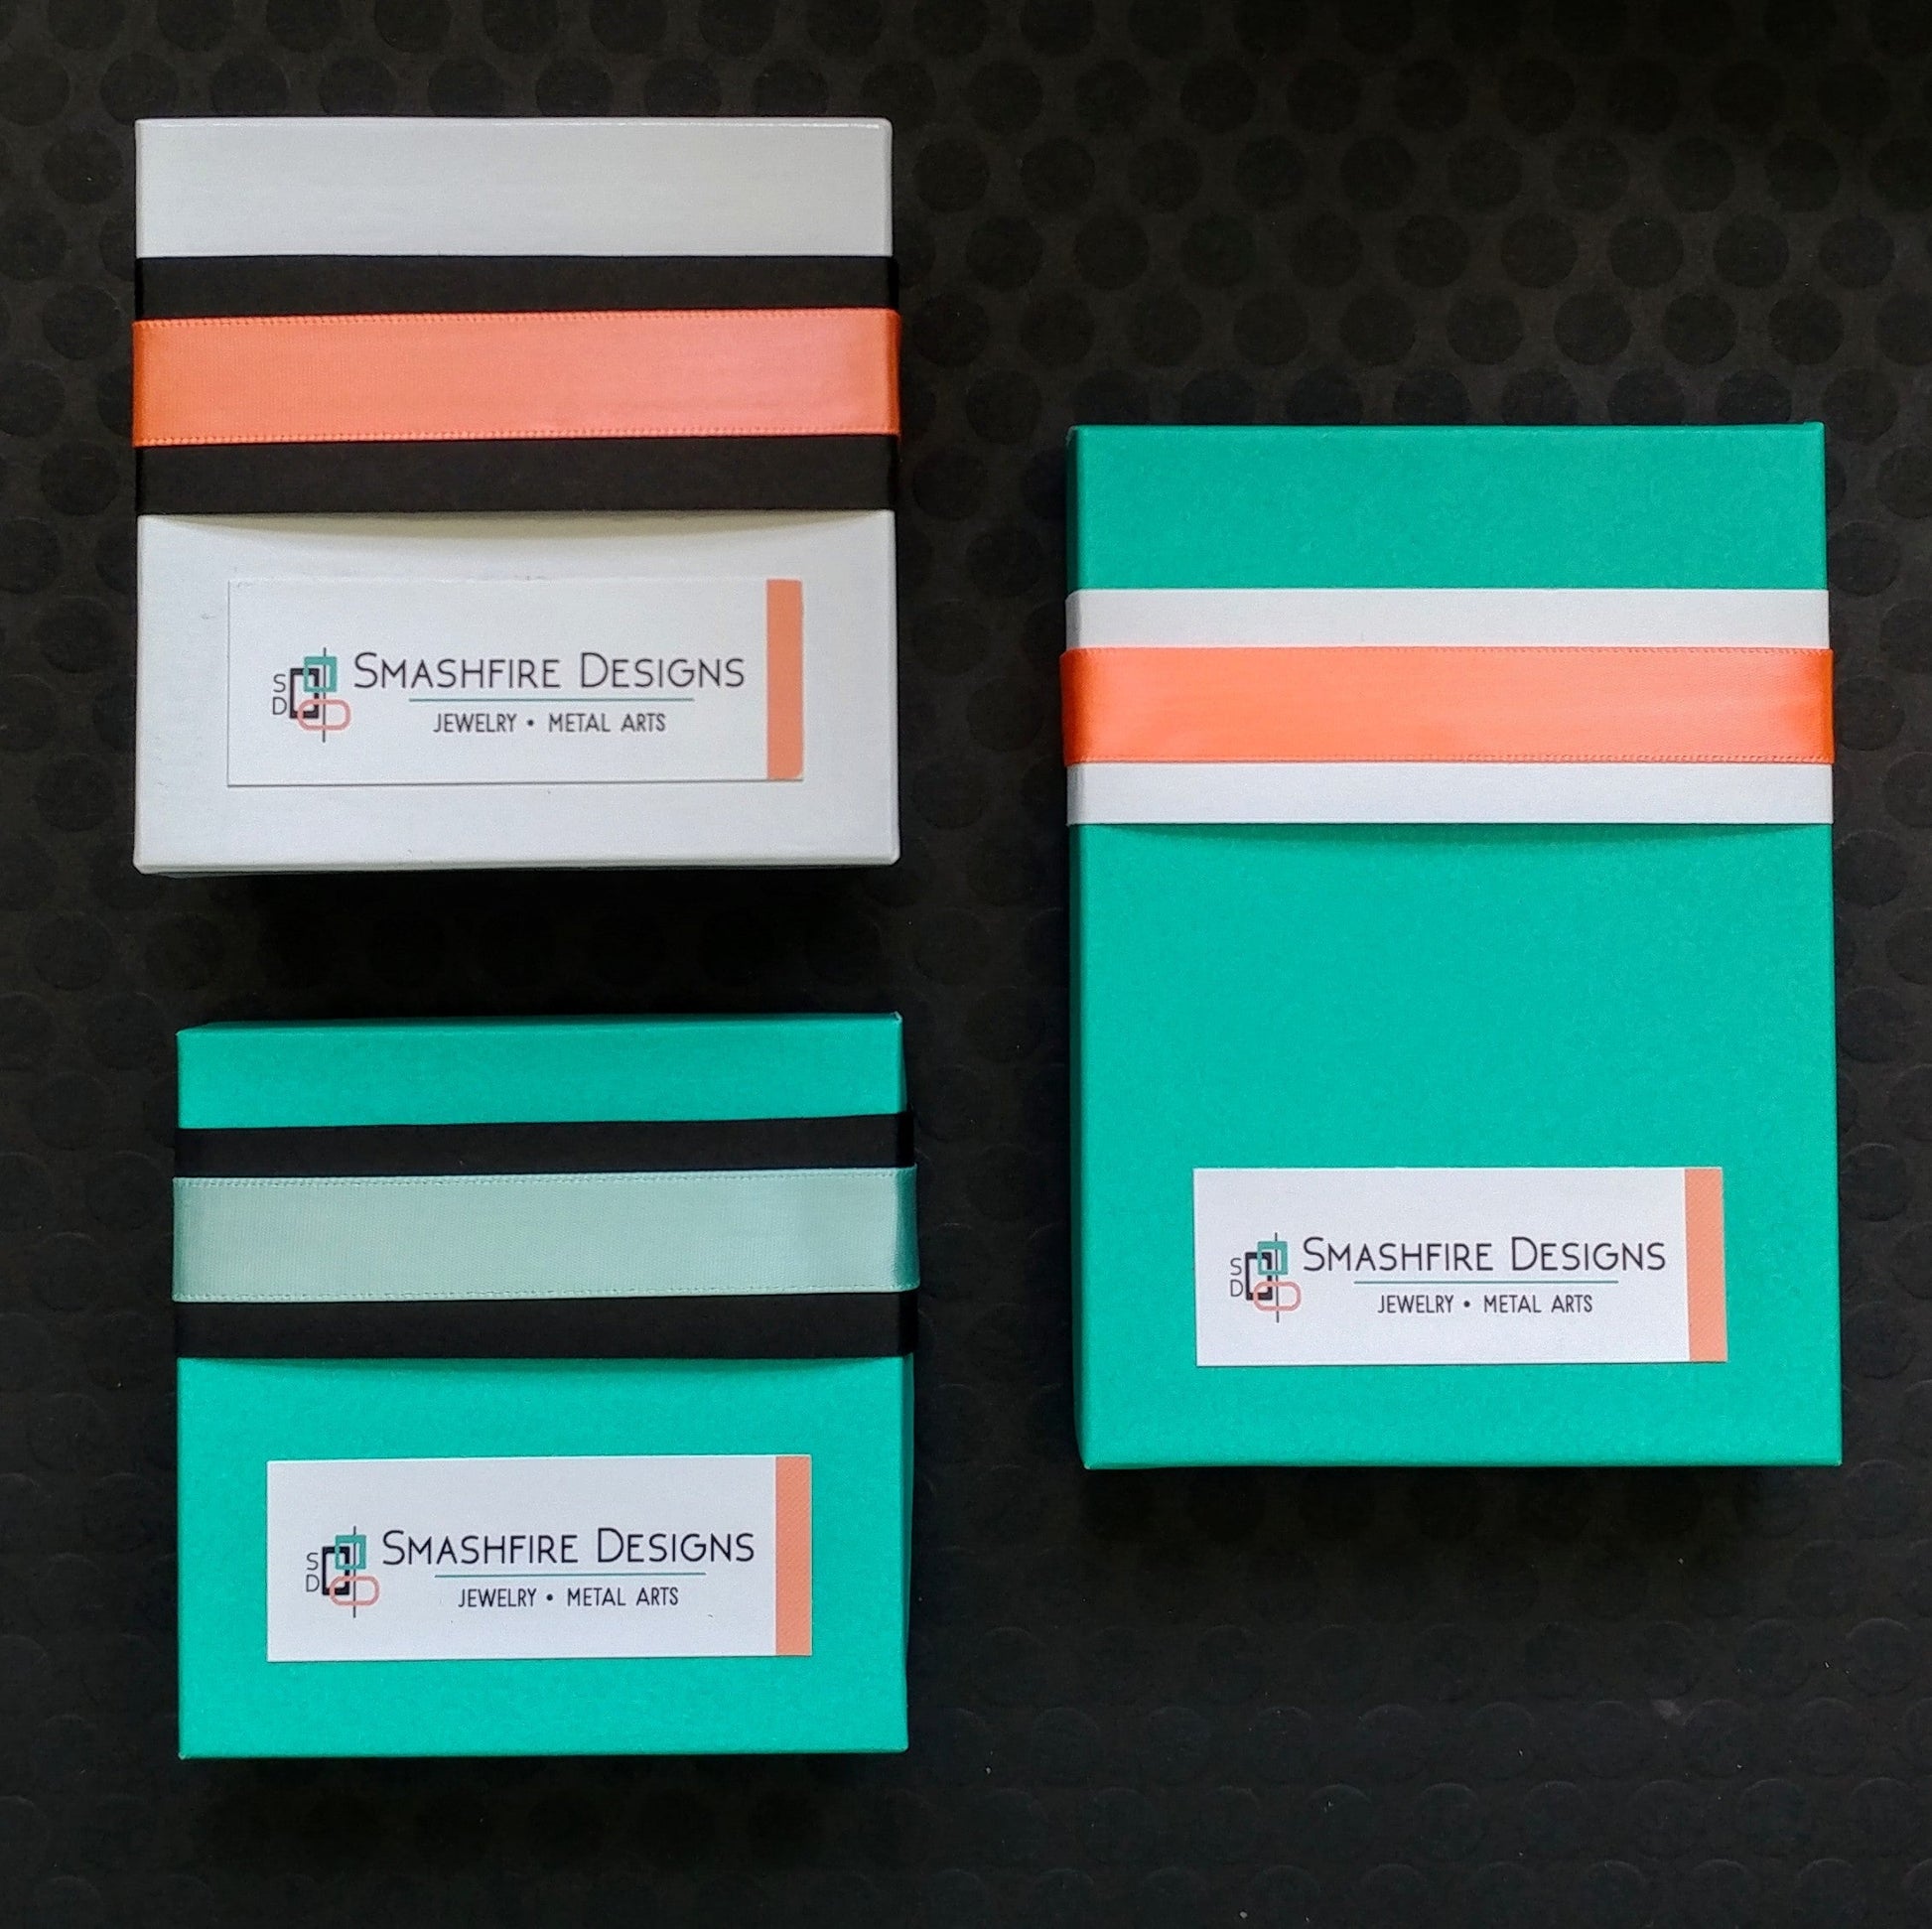 Teal and coral colored modernist packaging for Smashfire Designs